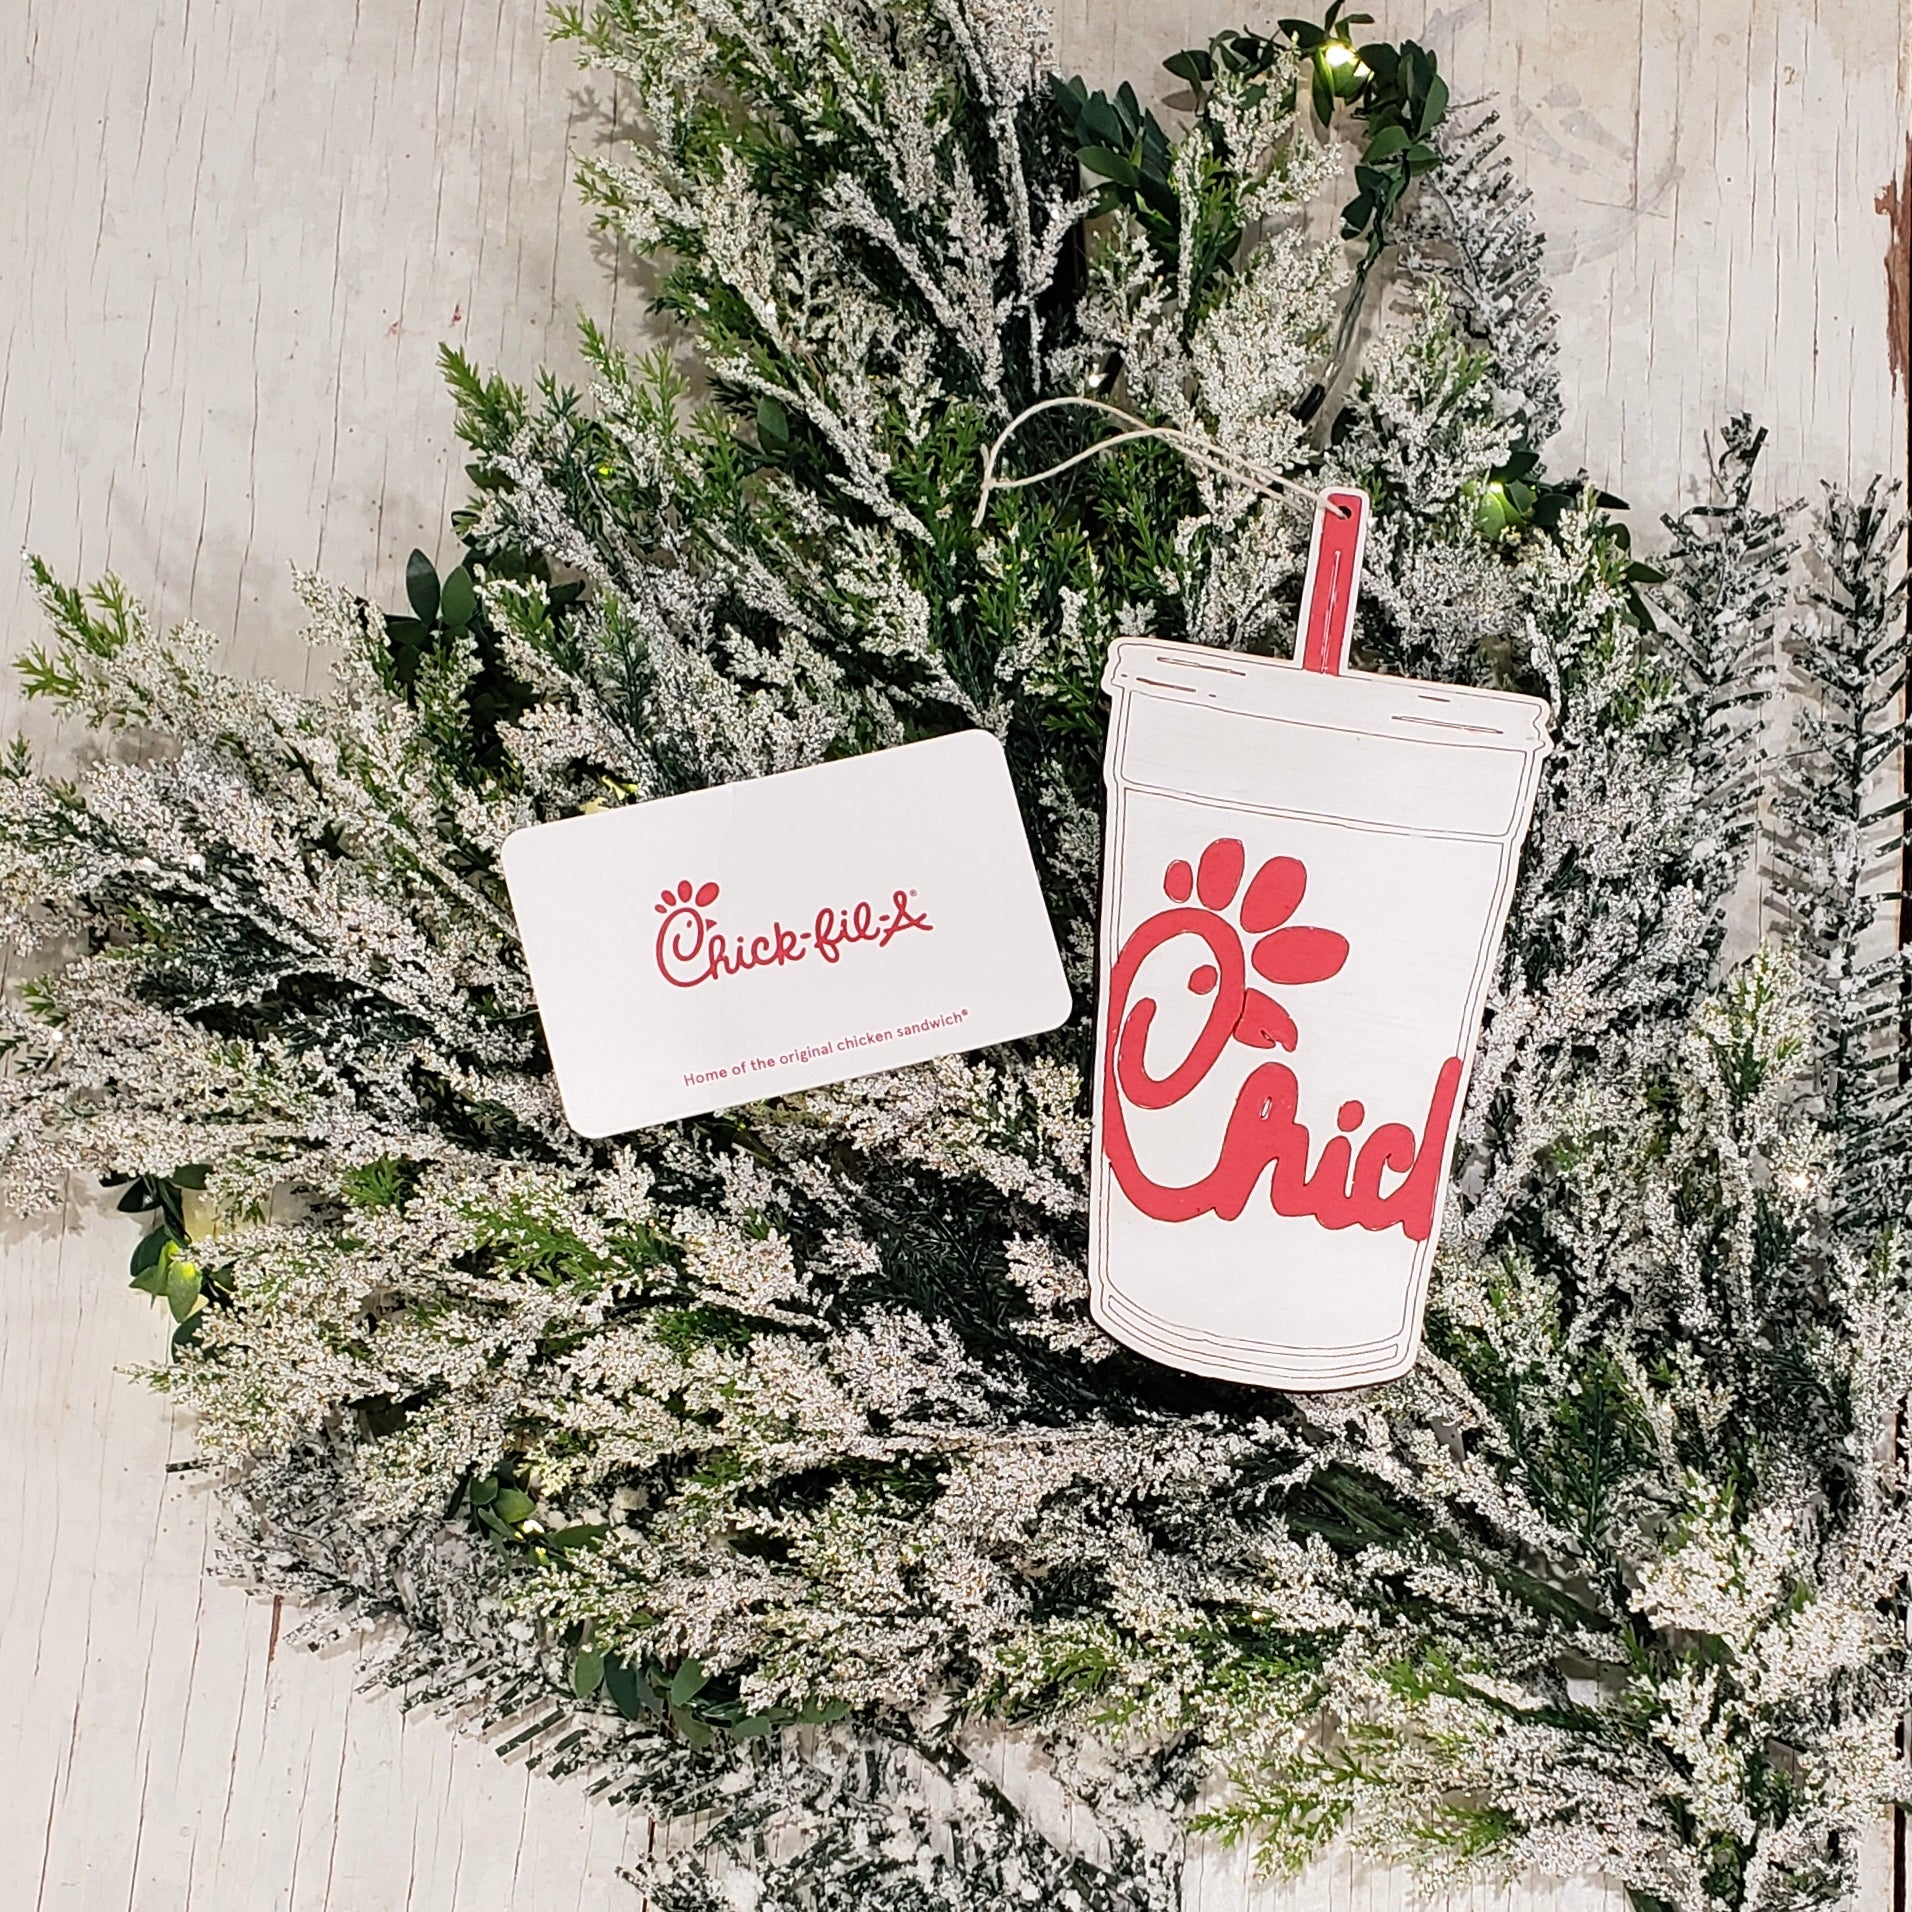 Chick-fil-A Ornament  Get your Chick-fil-A ornament while they